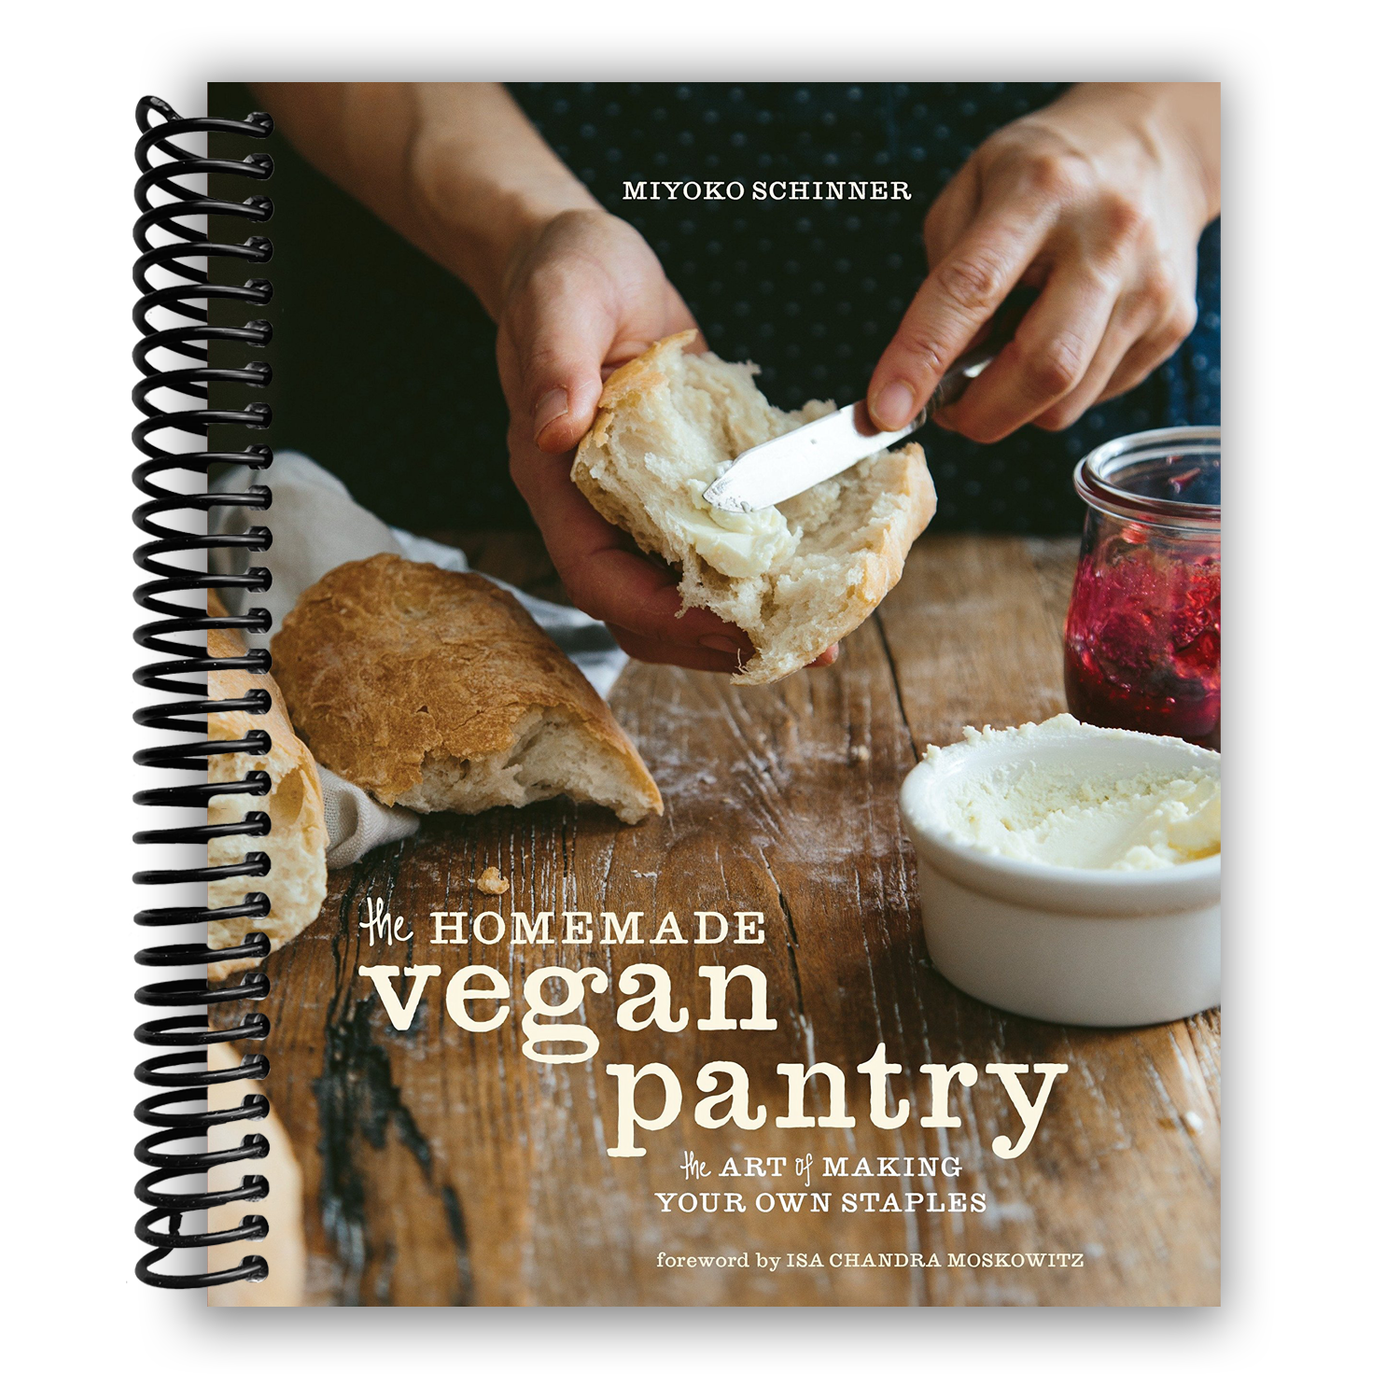 The Homemade Vegan Pantry: The Art of Making Your Own Staples (Spiral Bound)